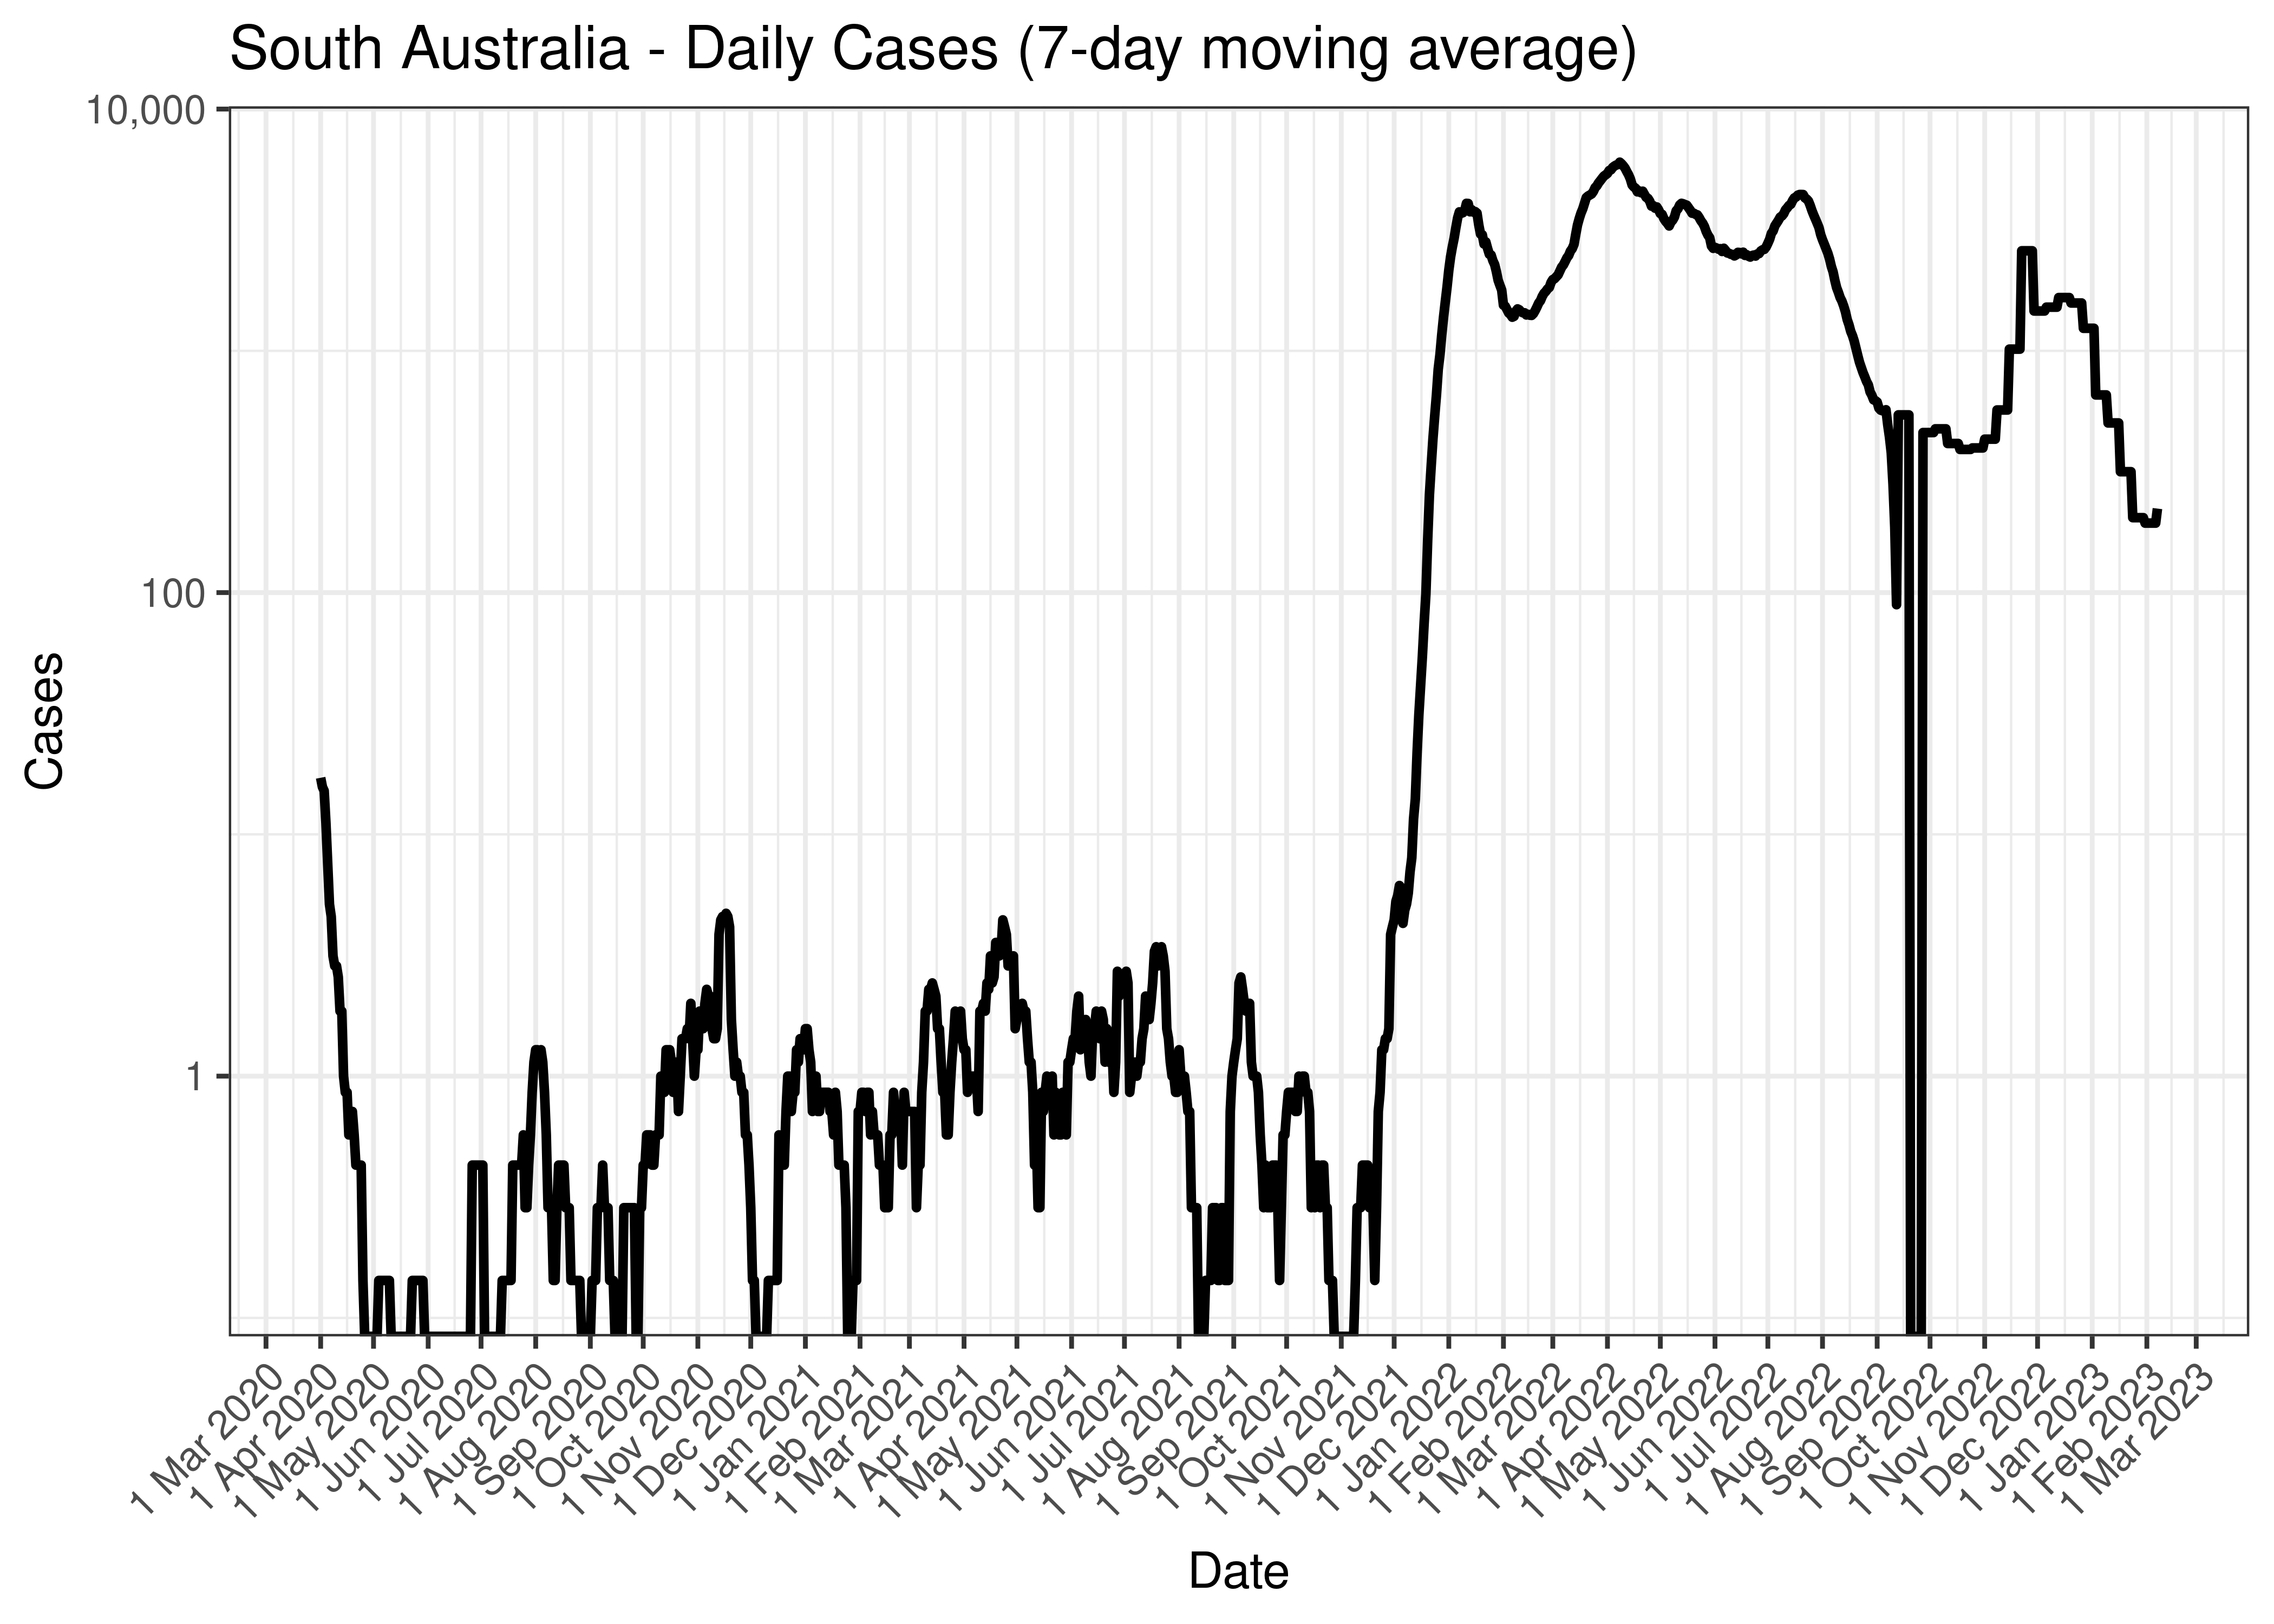 Queensland - Daily Cases, Admissions and Deaths for Last 30-days (7-day moving average)